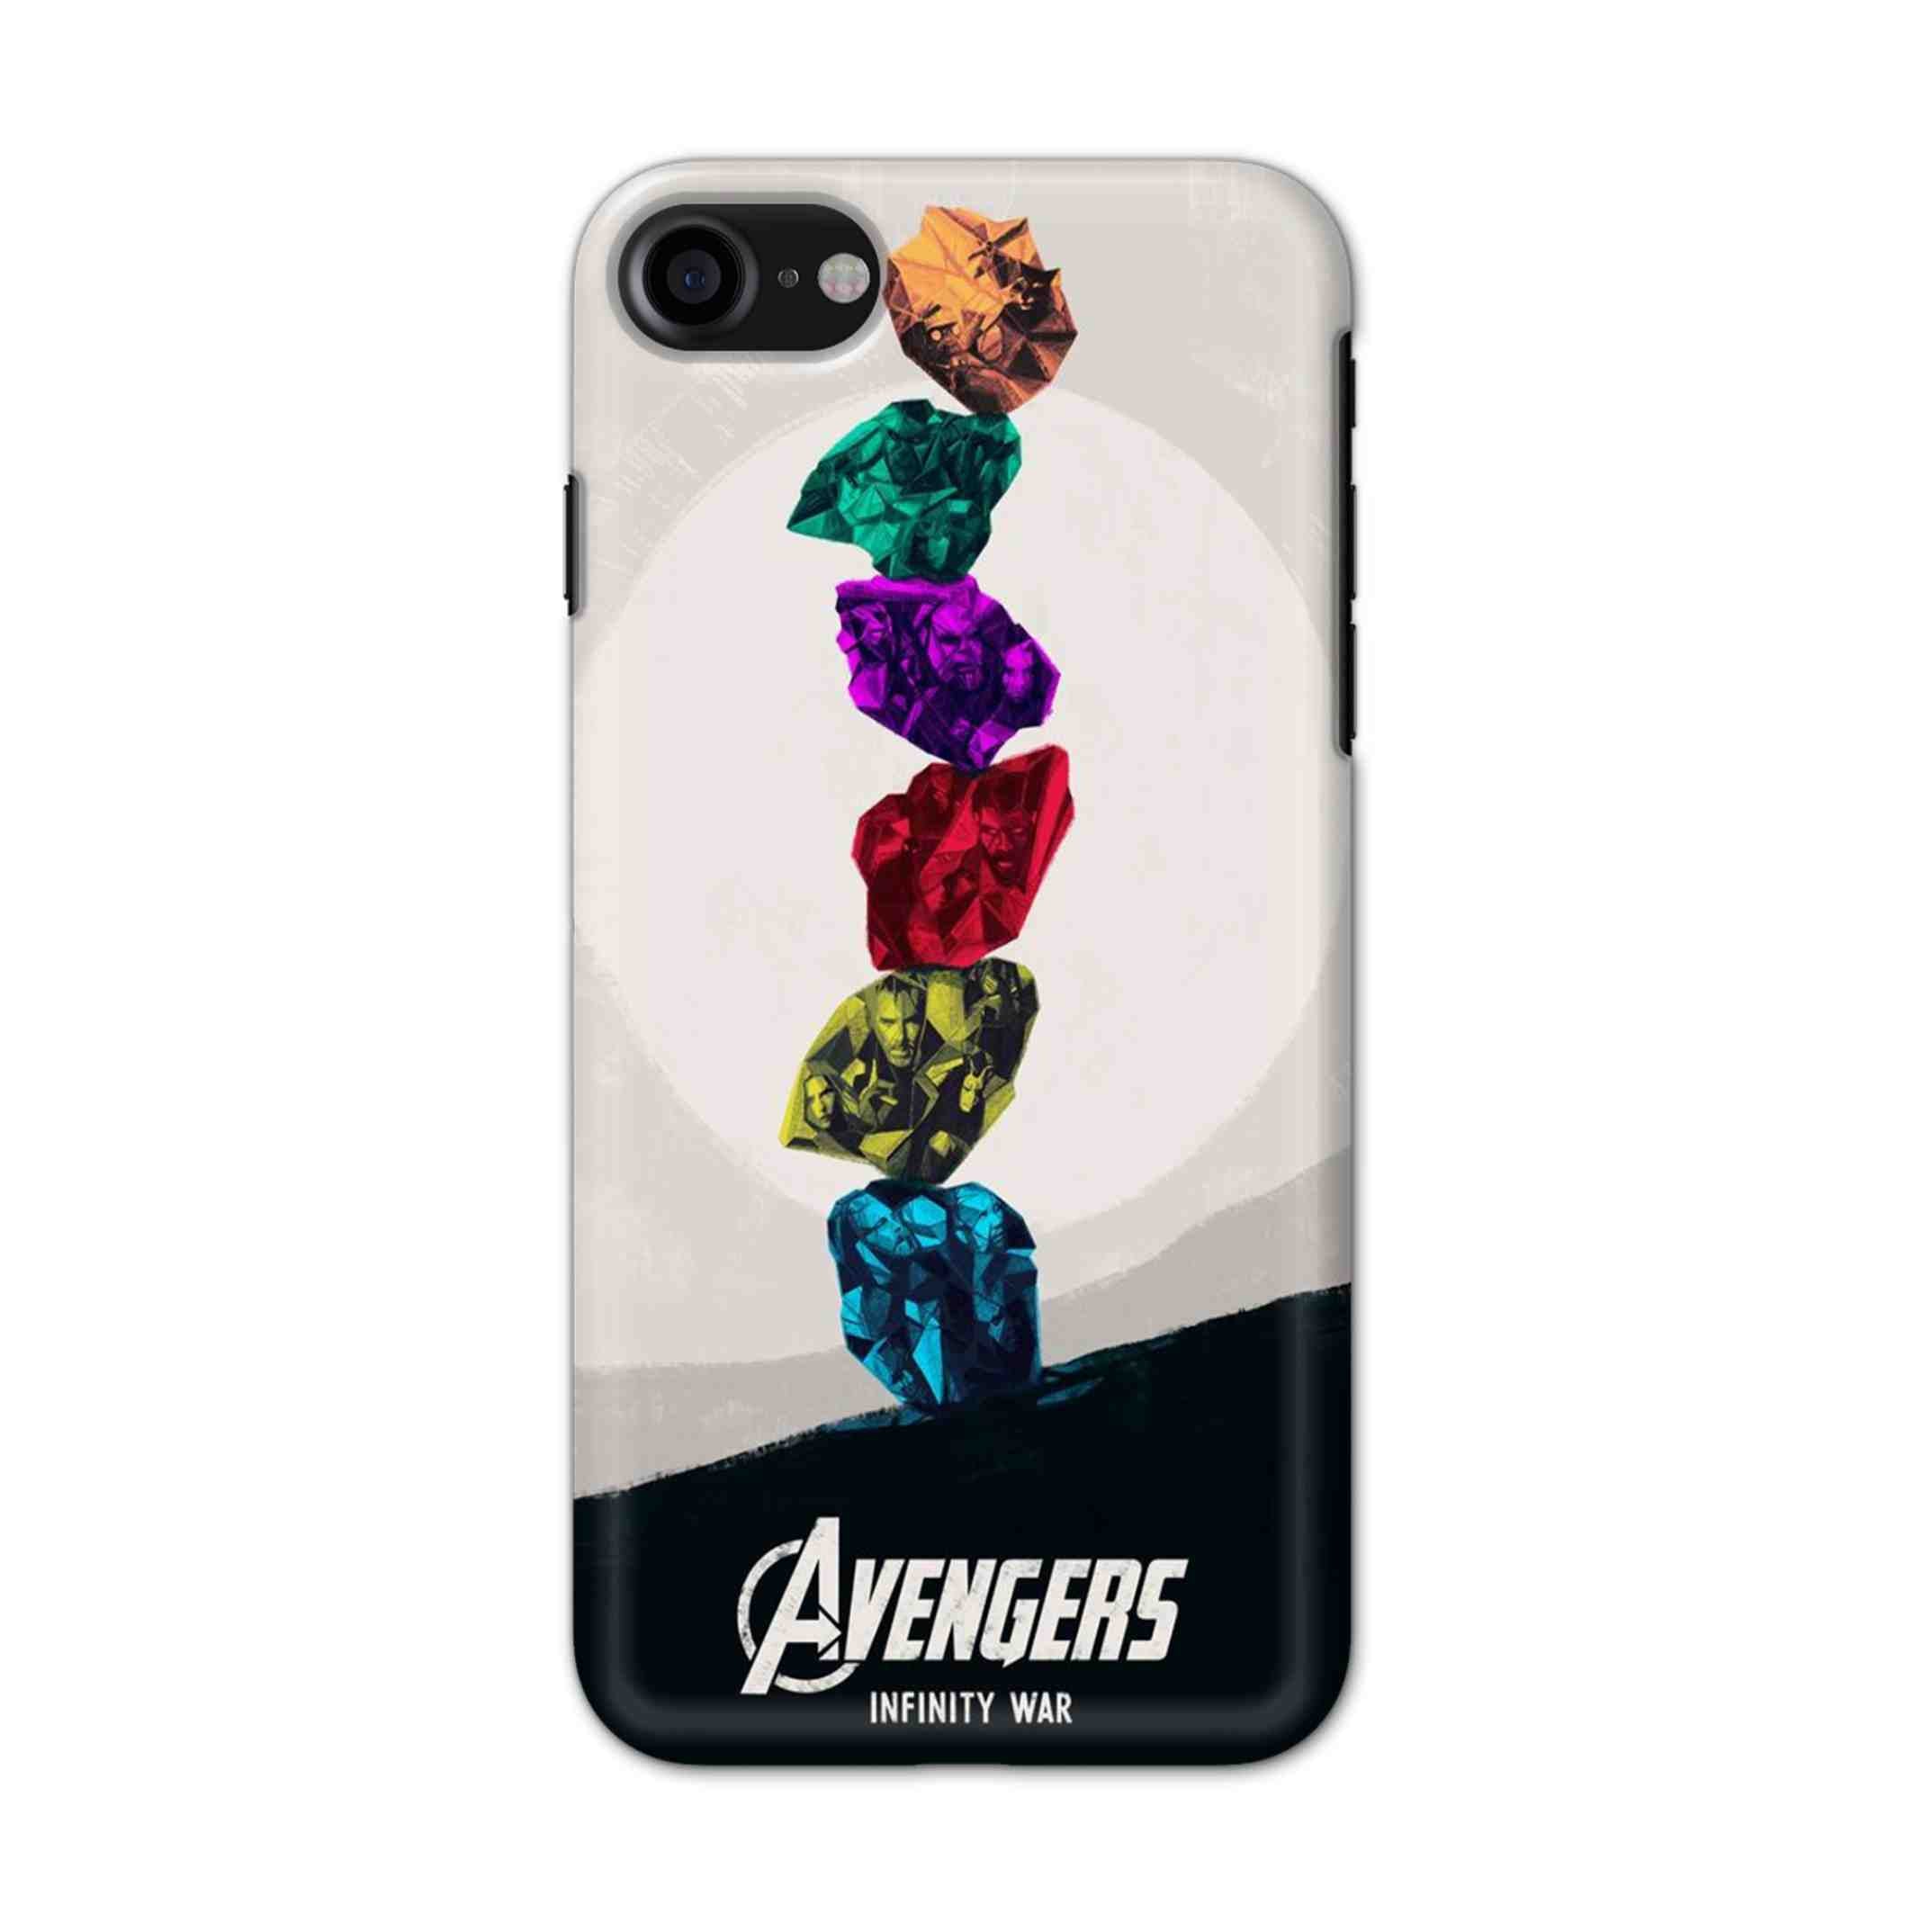 Buy Avengers Stone Hard Back Mobile Phone Case/Cover For iPhone 7 / 8 Online